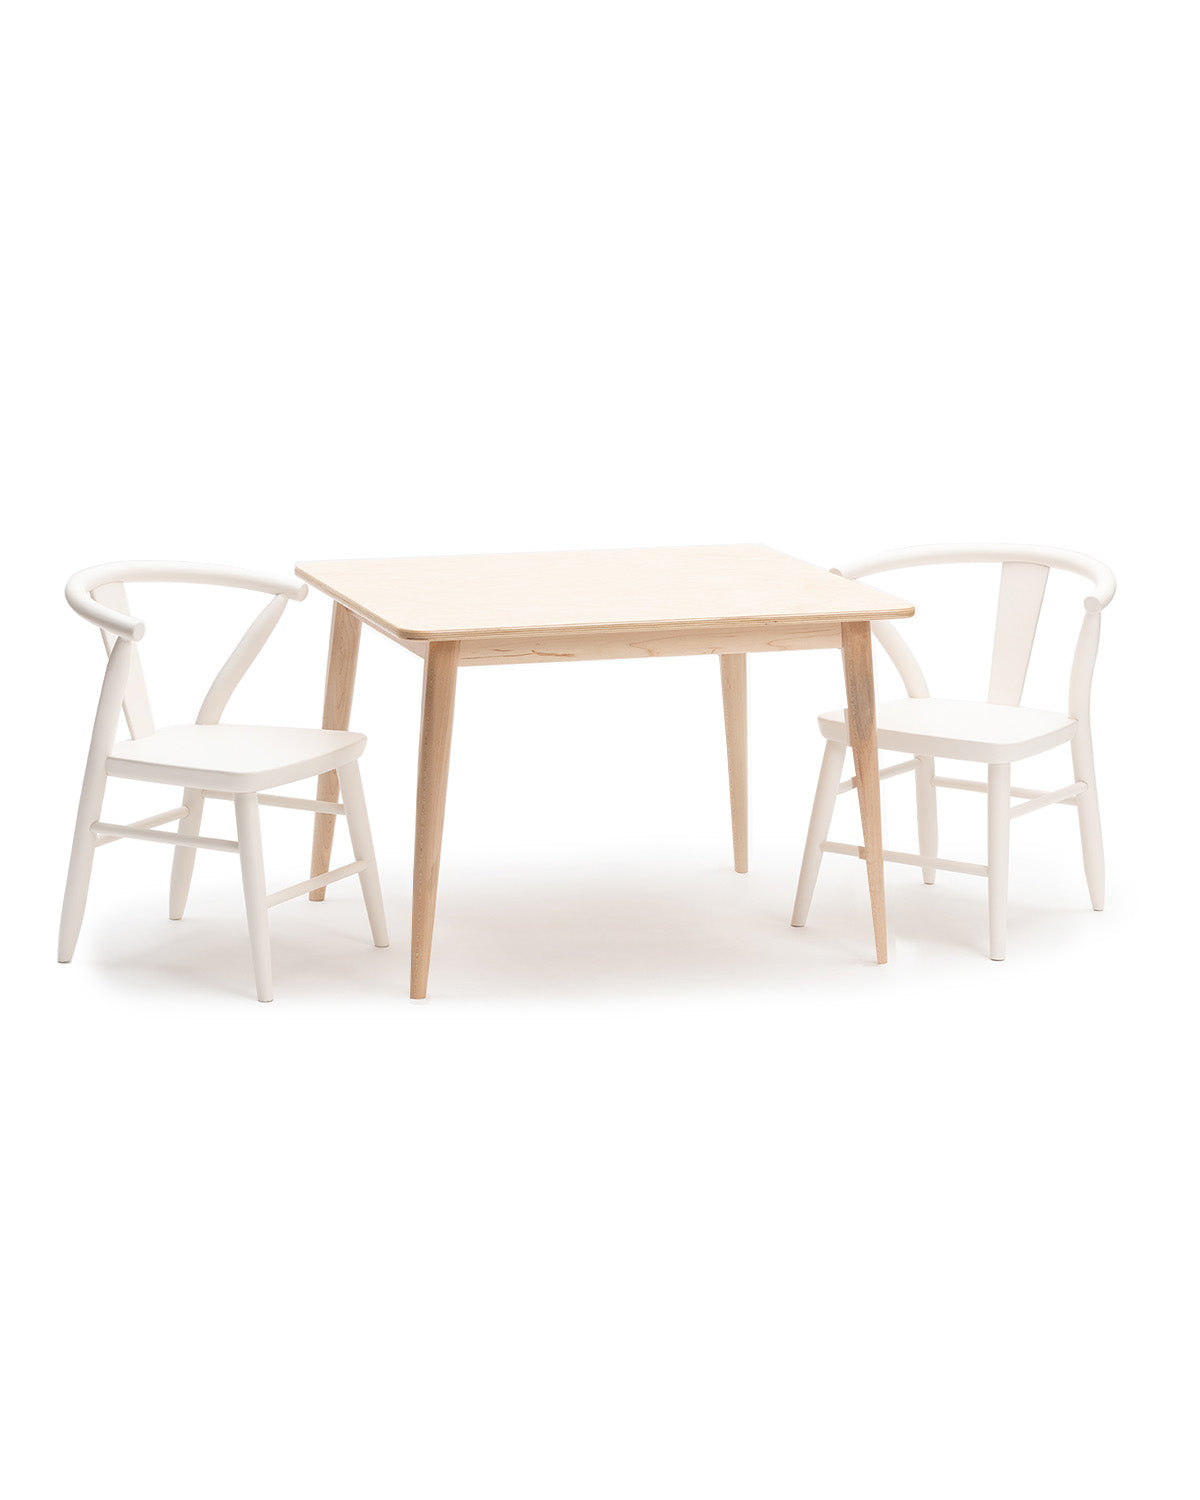 Children's Crescent Table and Chairs Bundle